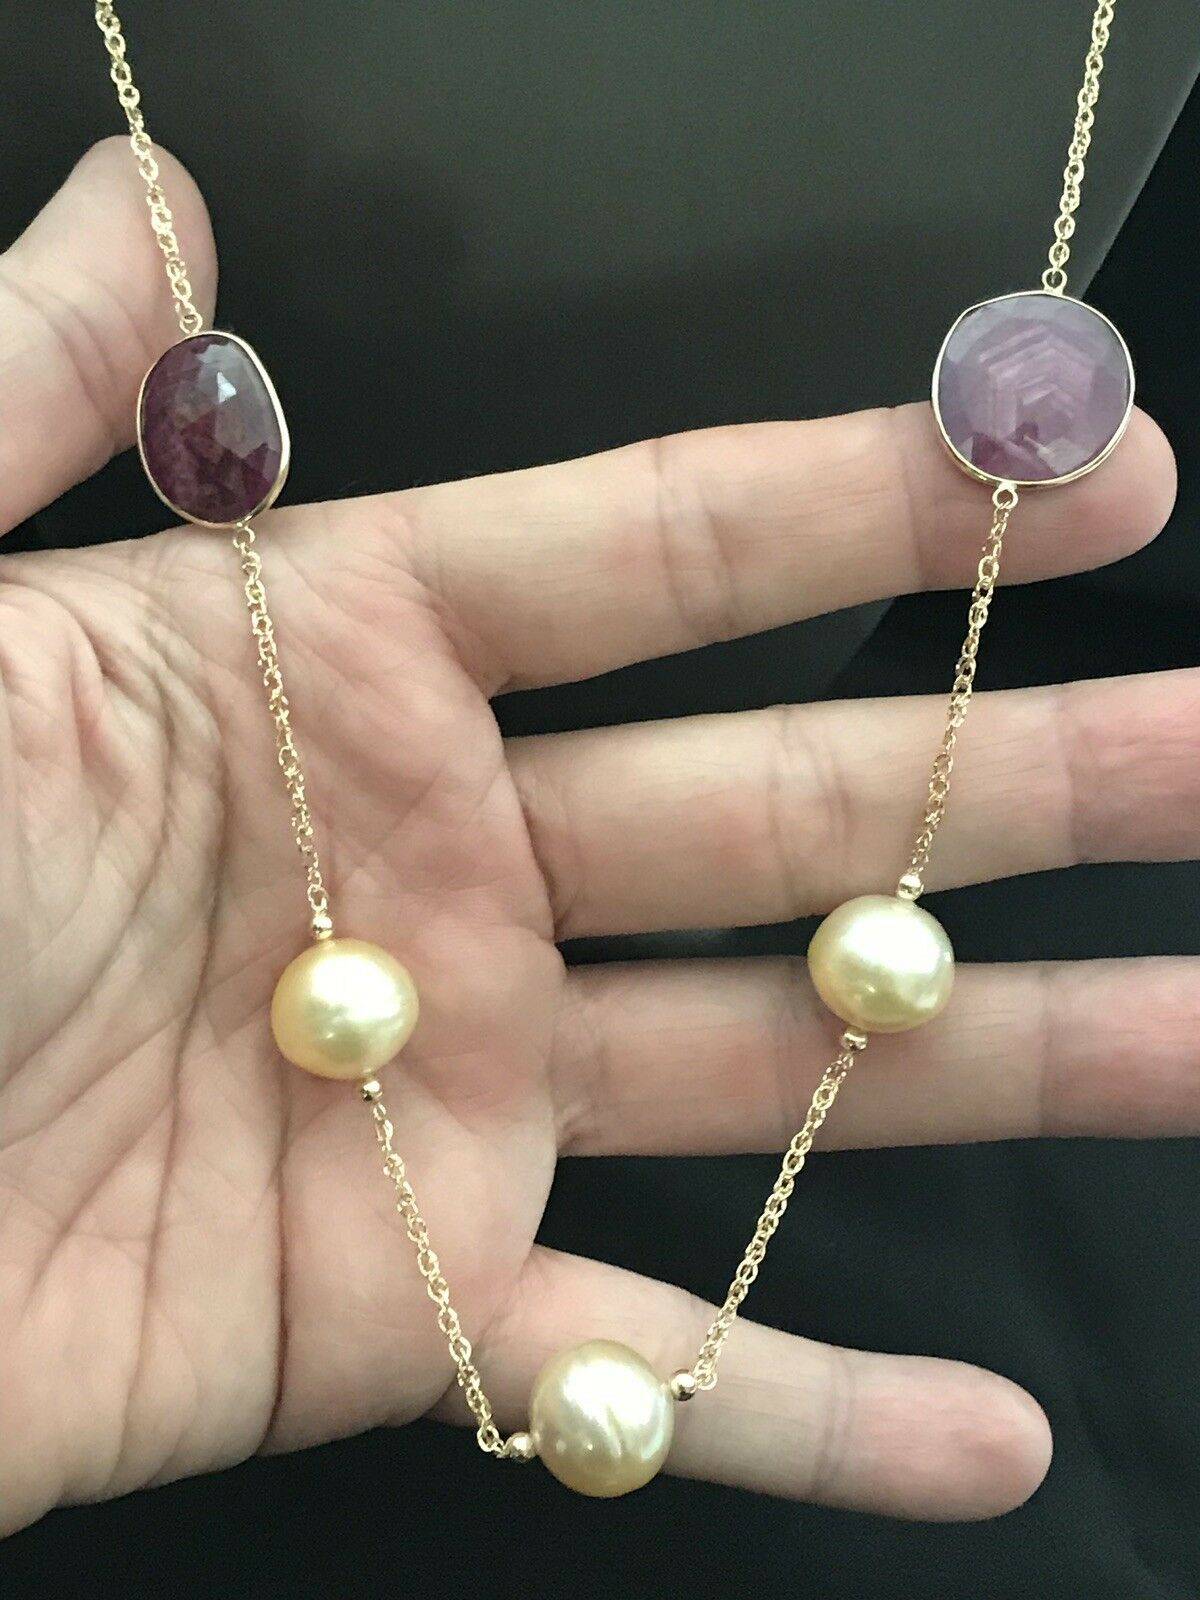 South Sea Pearl Ruby Sapphire Necklace 14k Gold Italy Certified $3,450 820427 - Certified Fine Jewelry